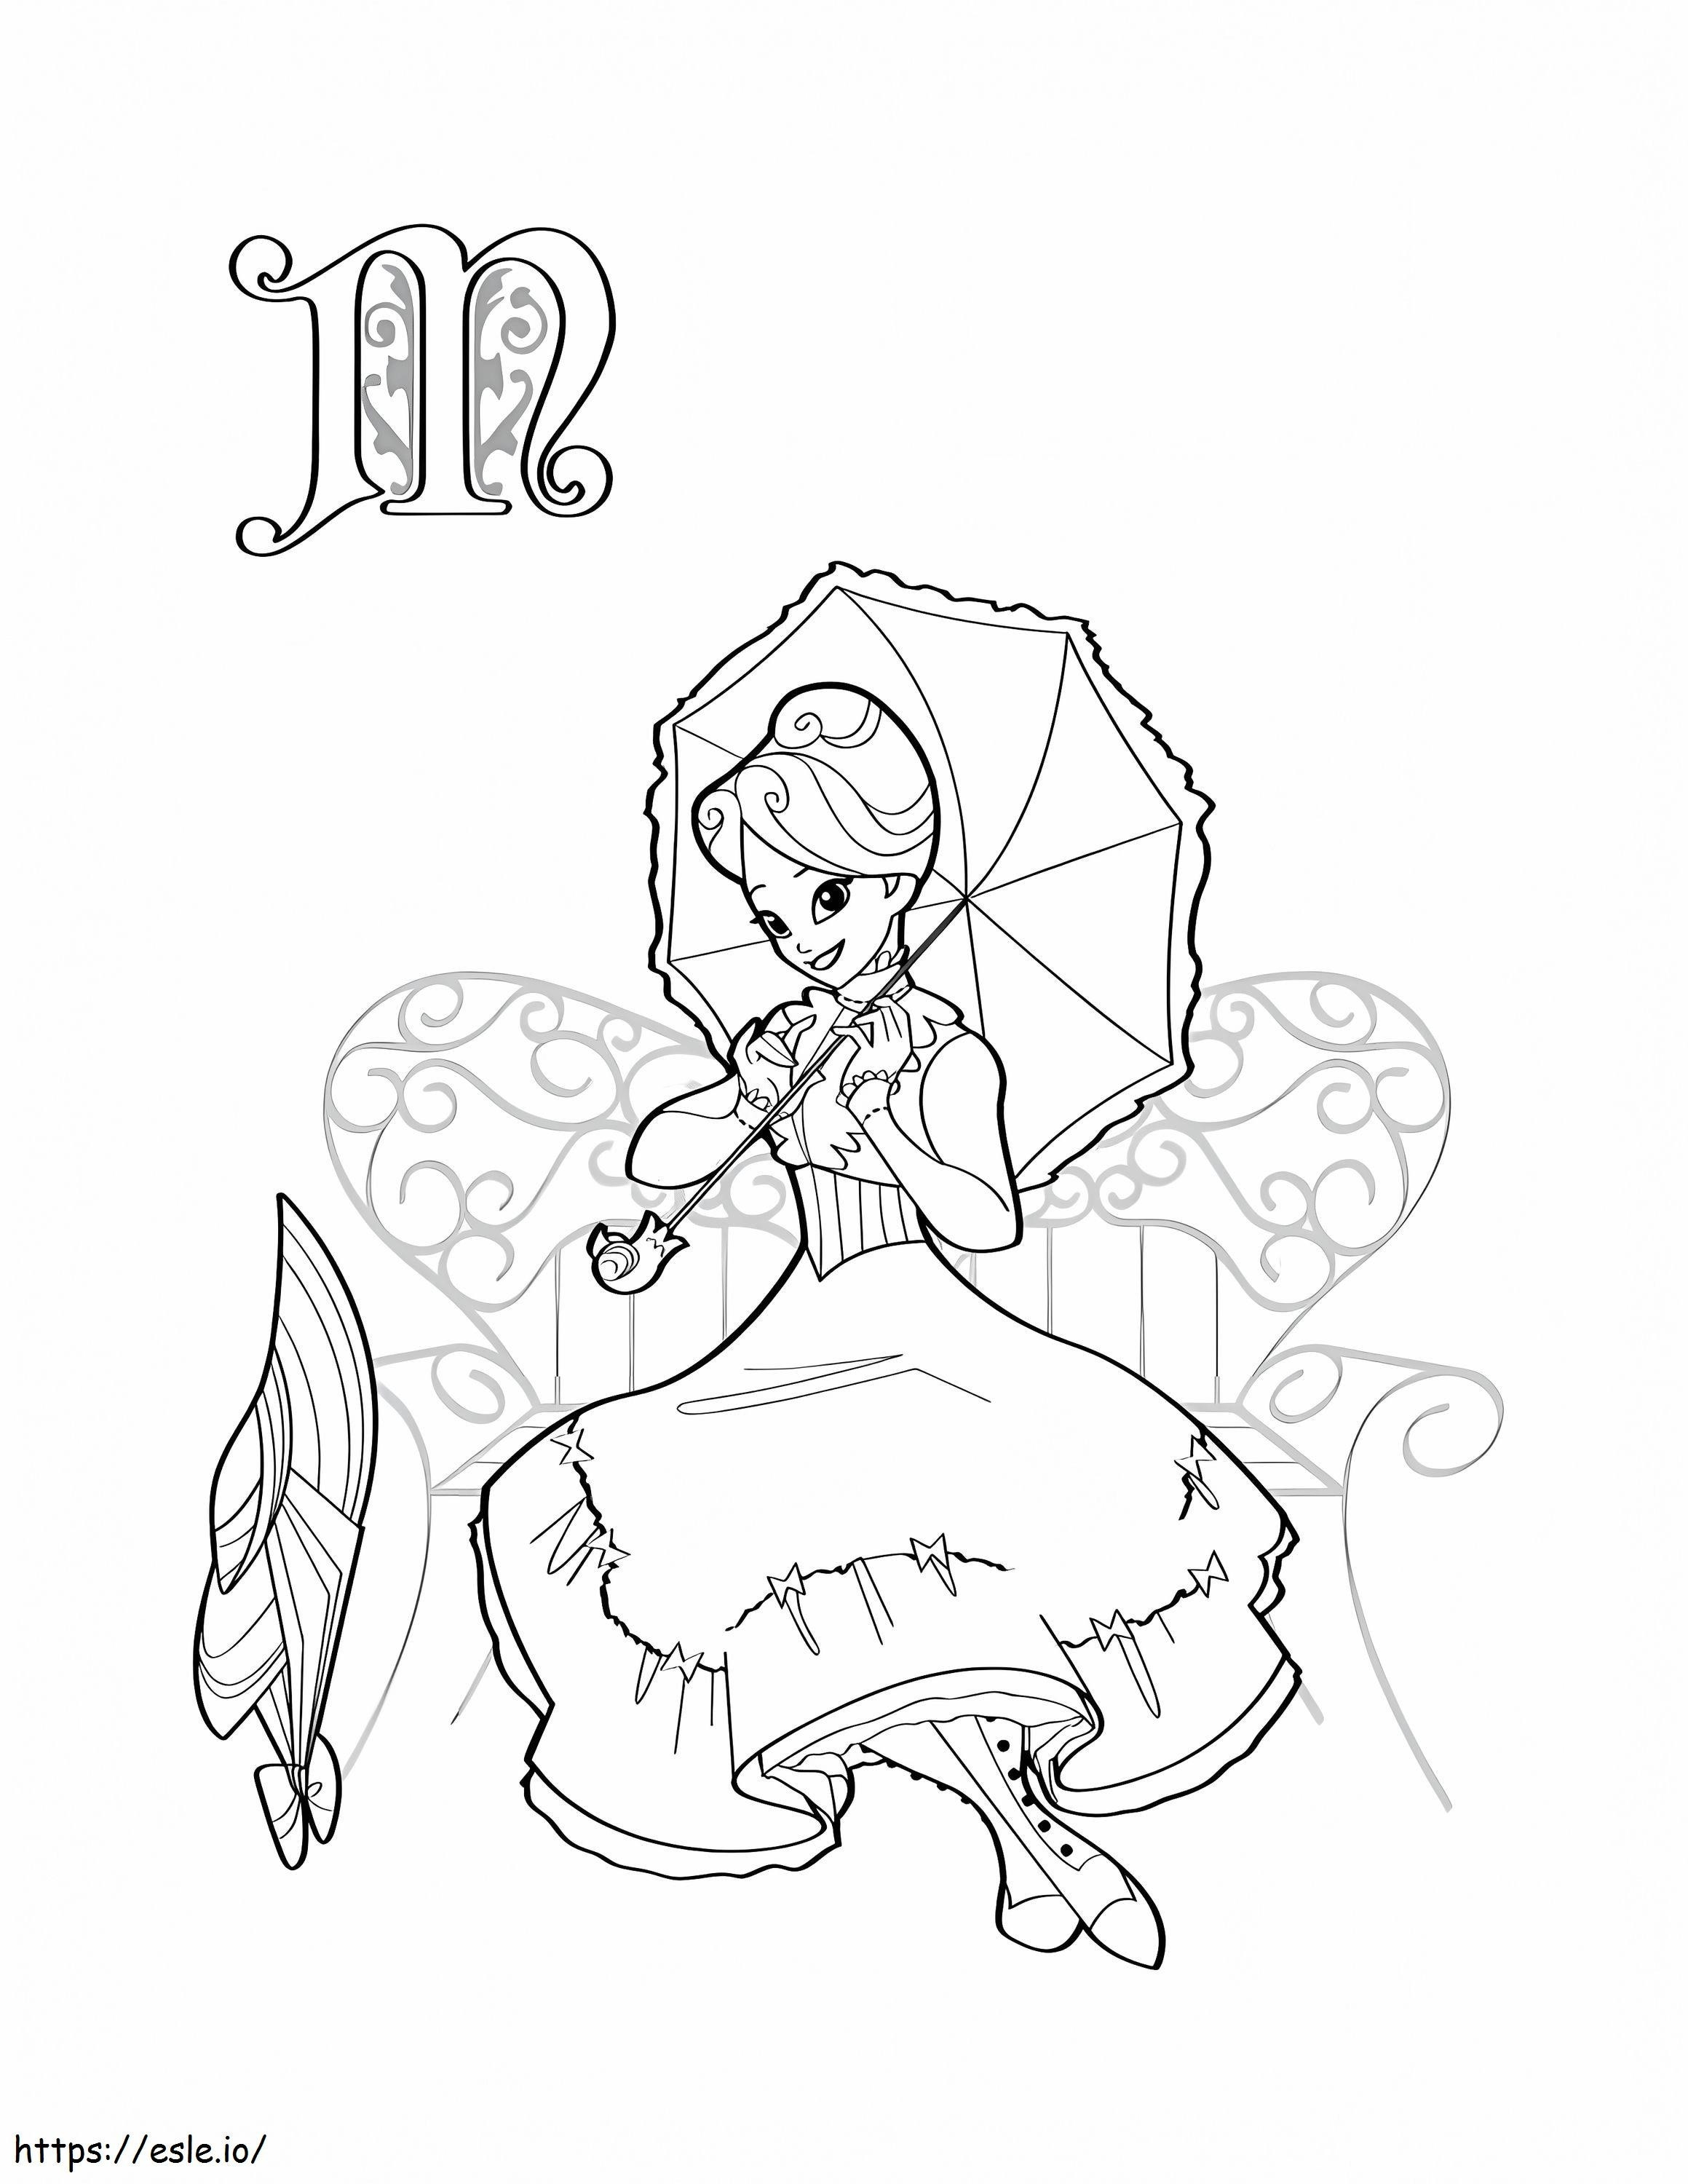 Cute Mary Poppins coloring page